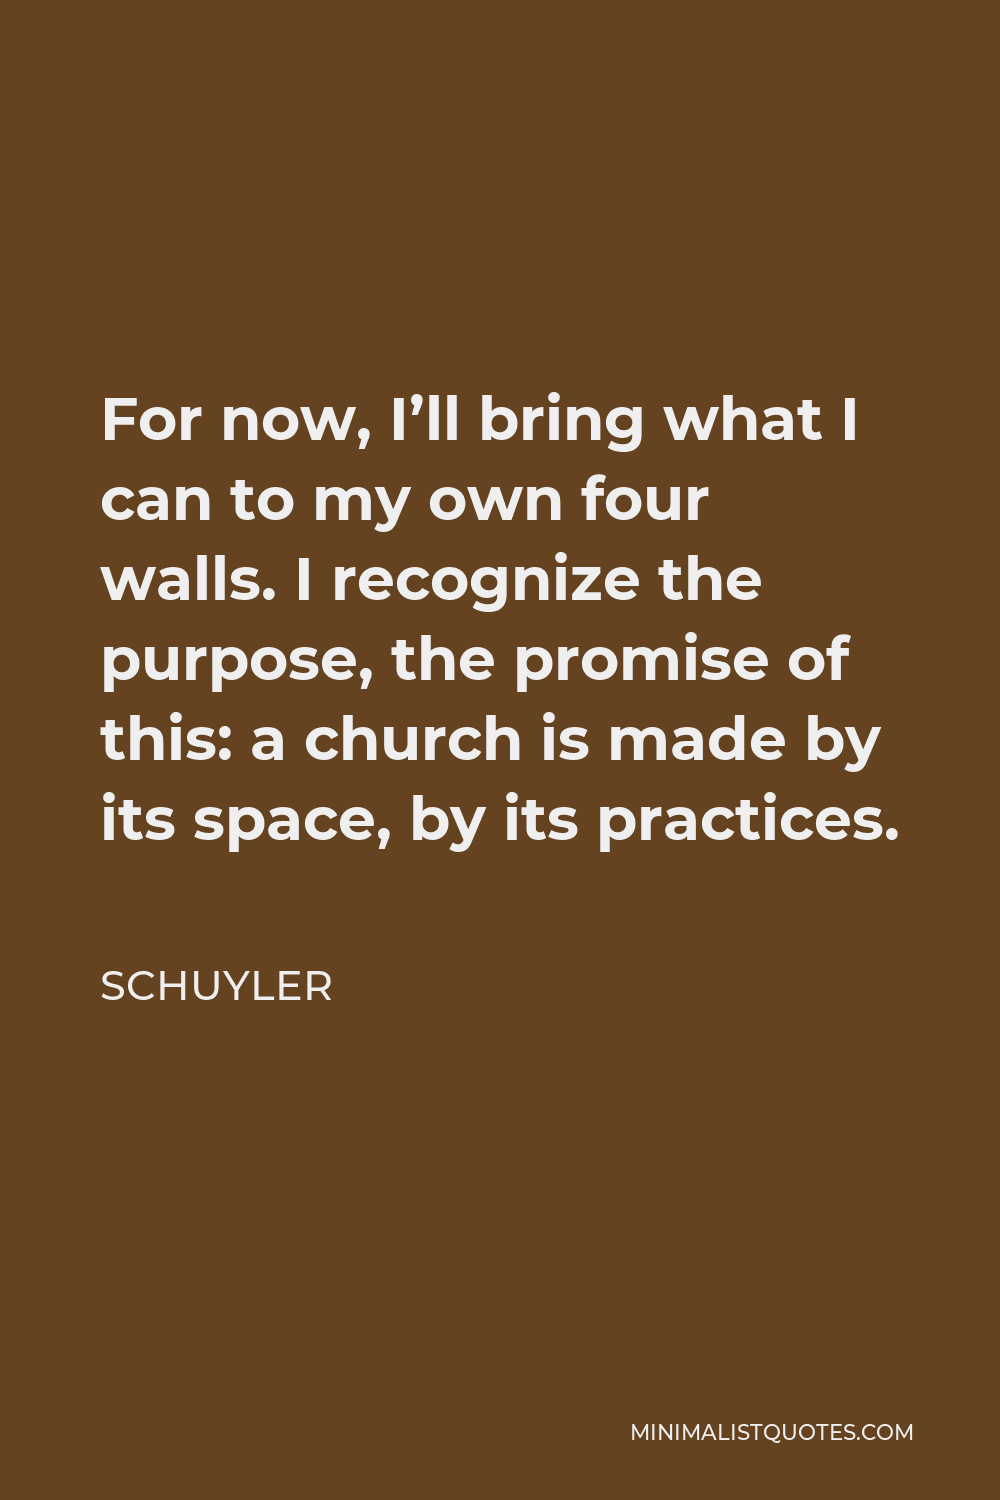 Schuyler Quote - For now, I’ll bring what I can to my own four walls. I recognize the purpose, the promise of this: a church is made by its space, by its practices.